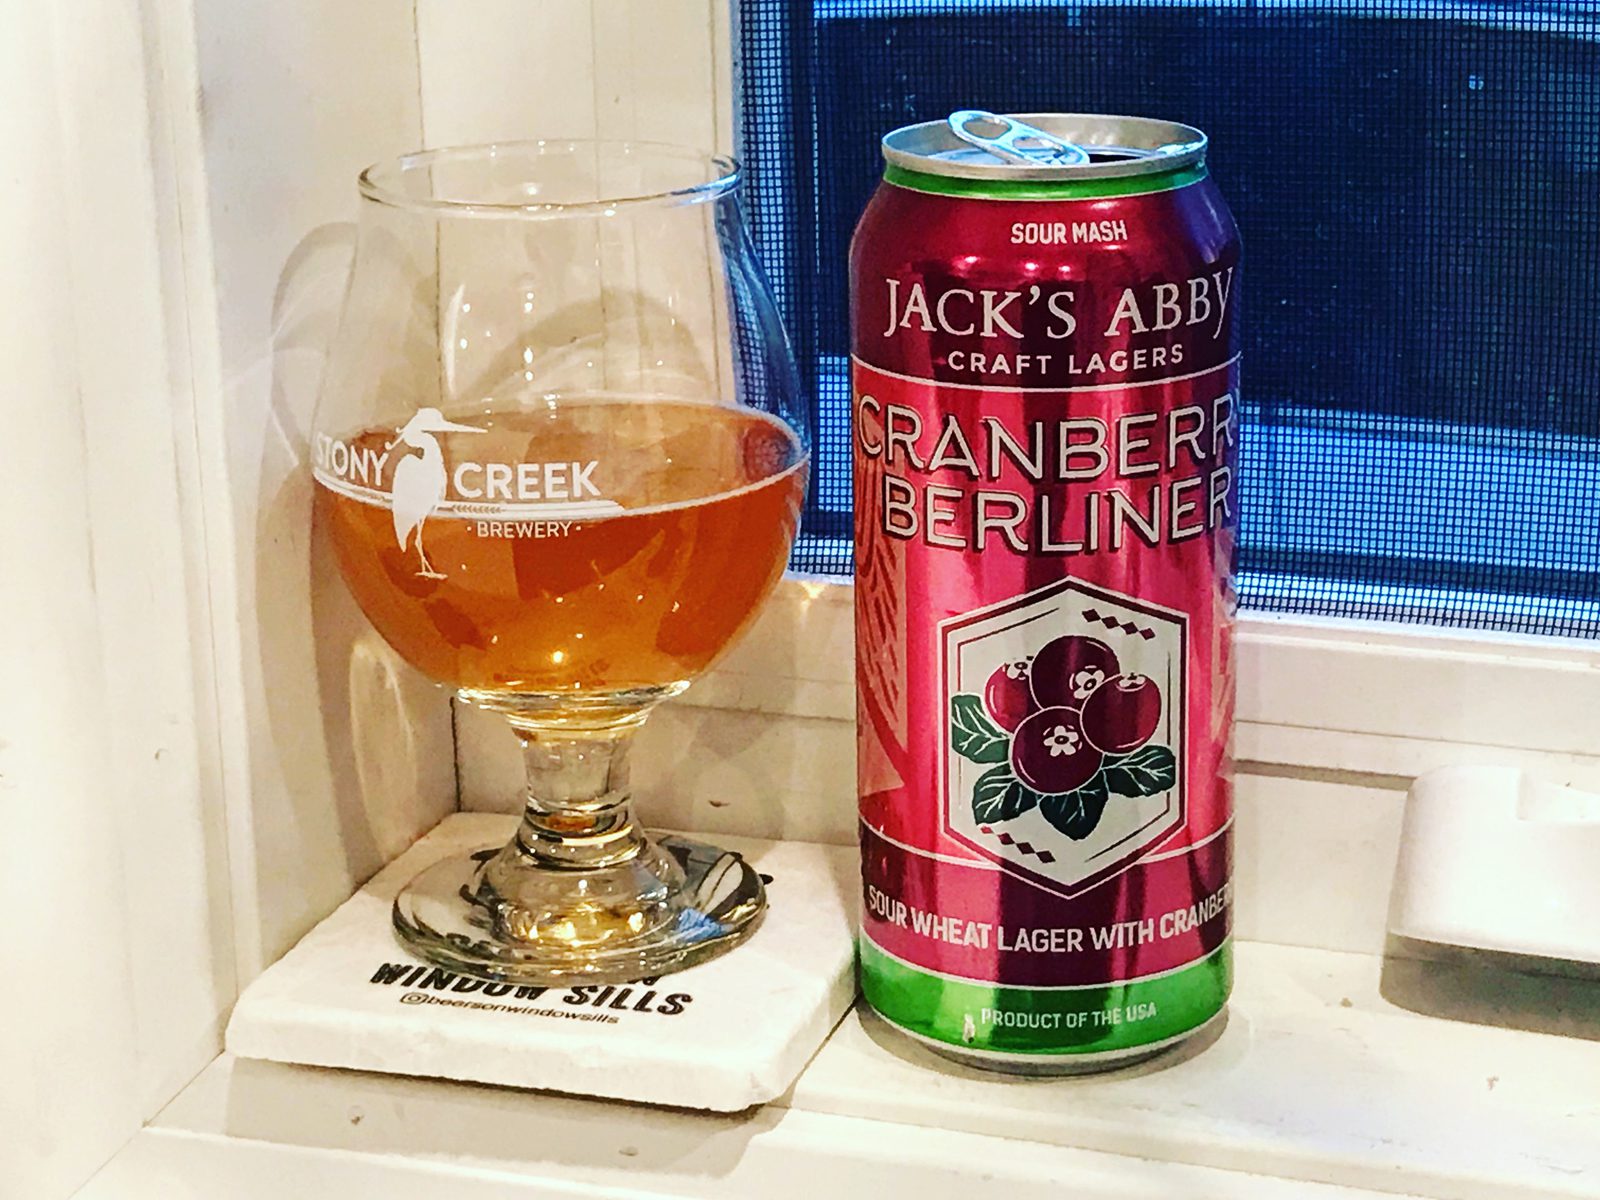 Jack's Abby Craft Lagers Cranberry Berliner